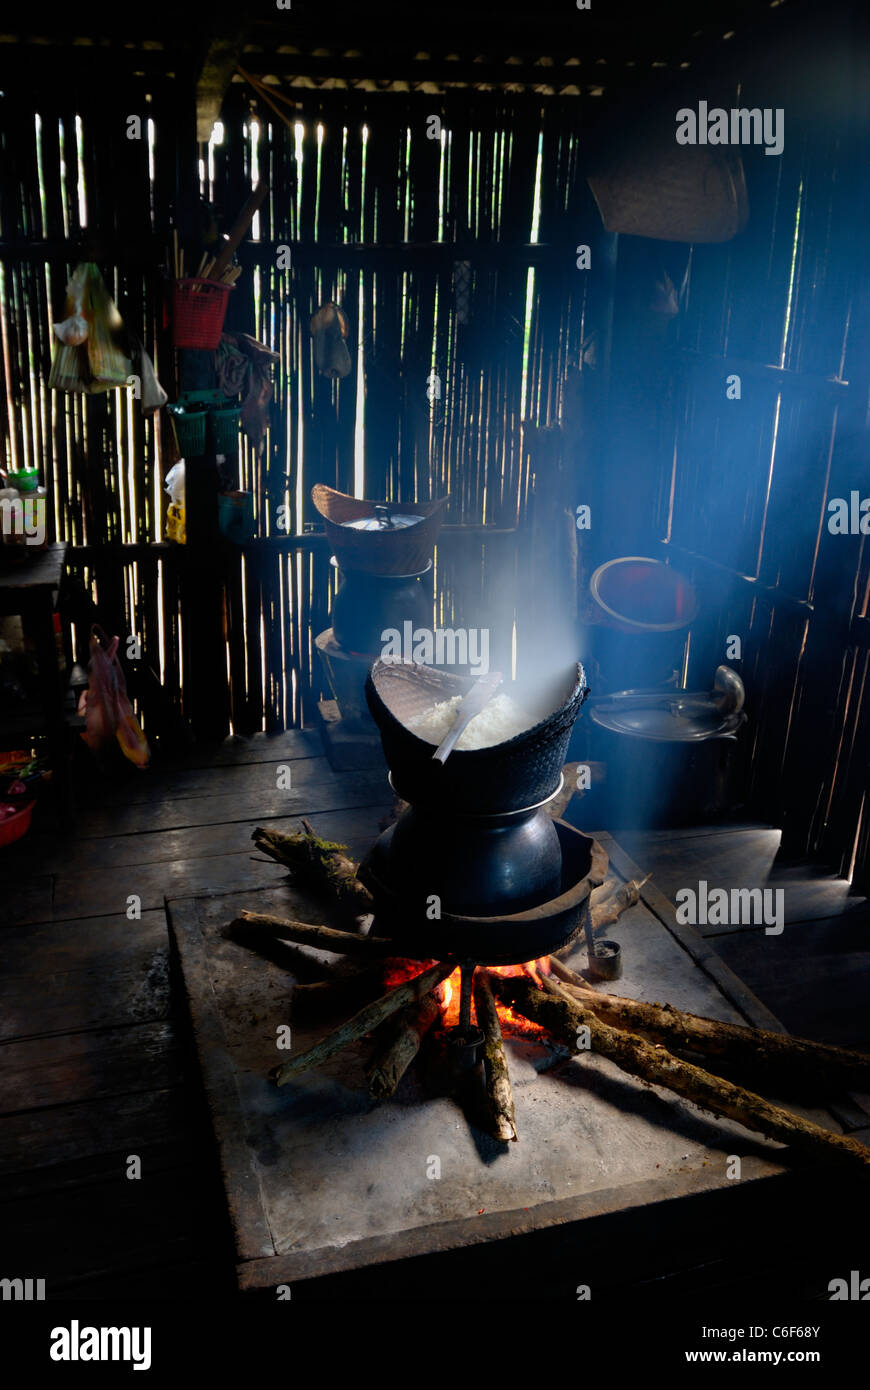 Steamer pot and sticky rice basket in a rural, wooden kitchen of a house in Nong Luang village, Bolaven plateau, Champasak, Laos Stock Photo